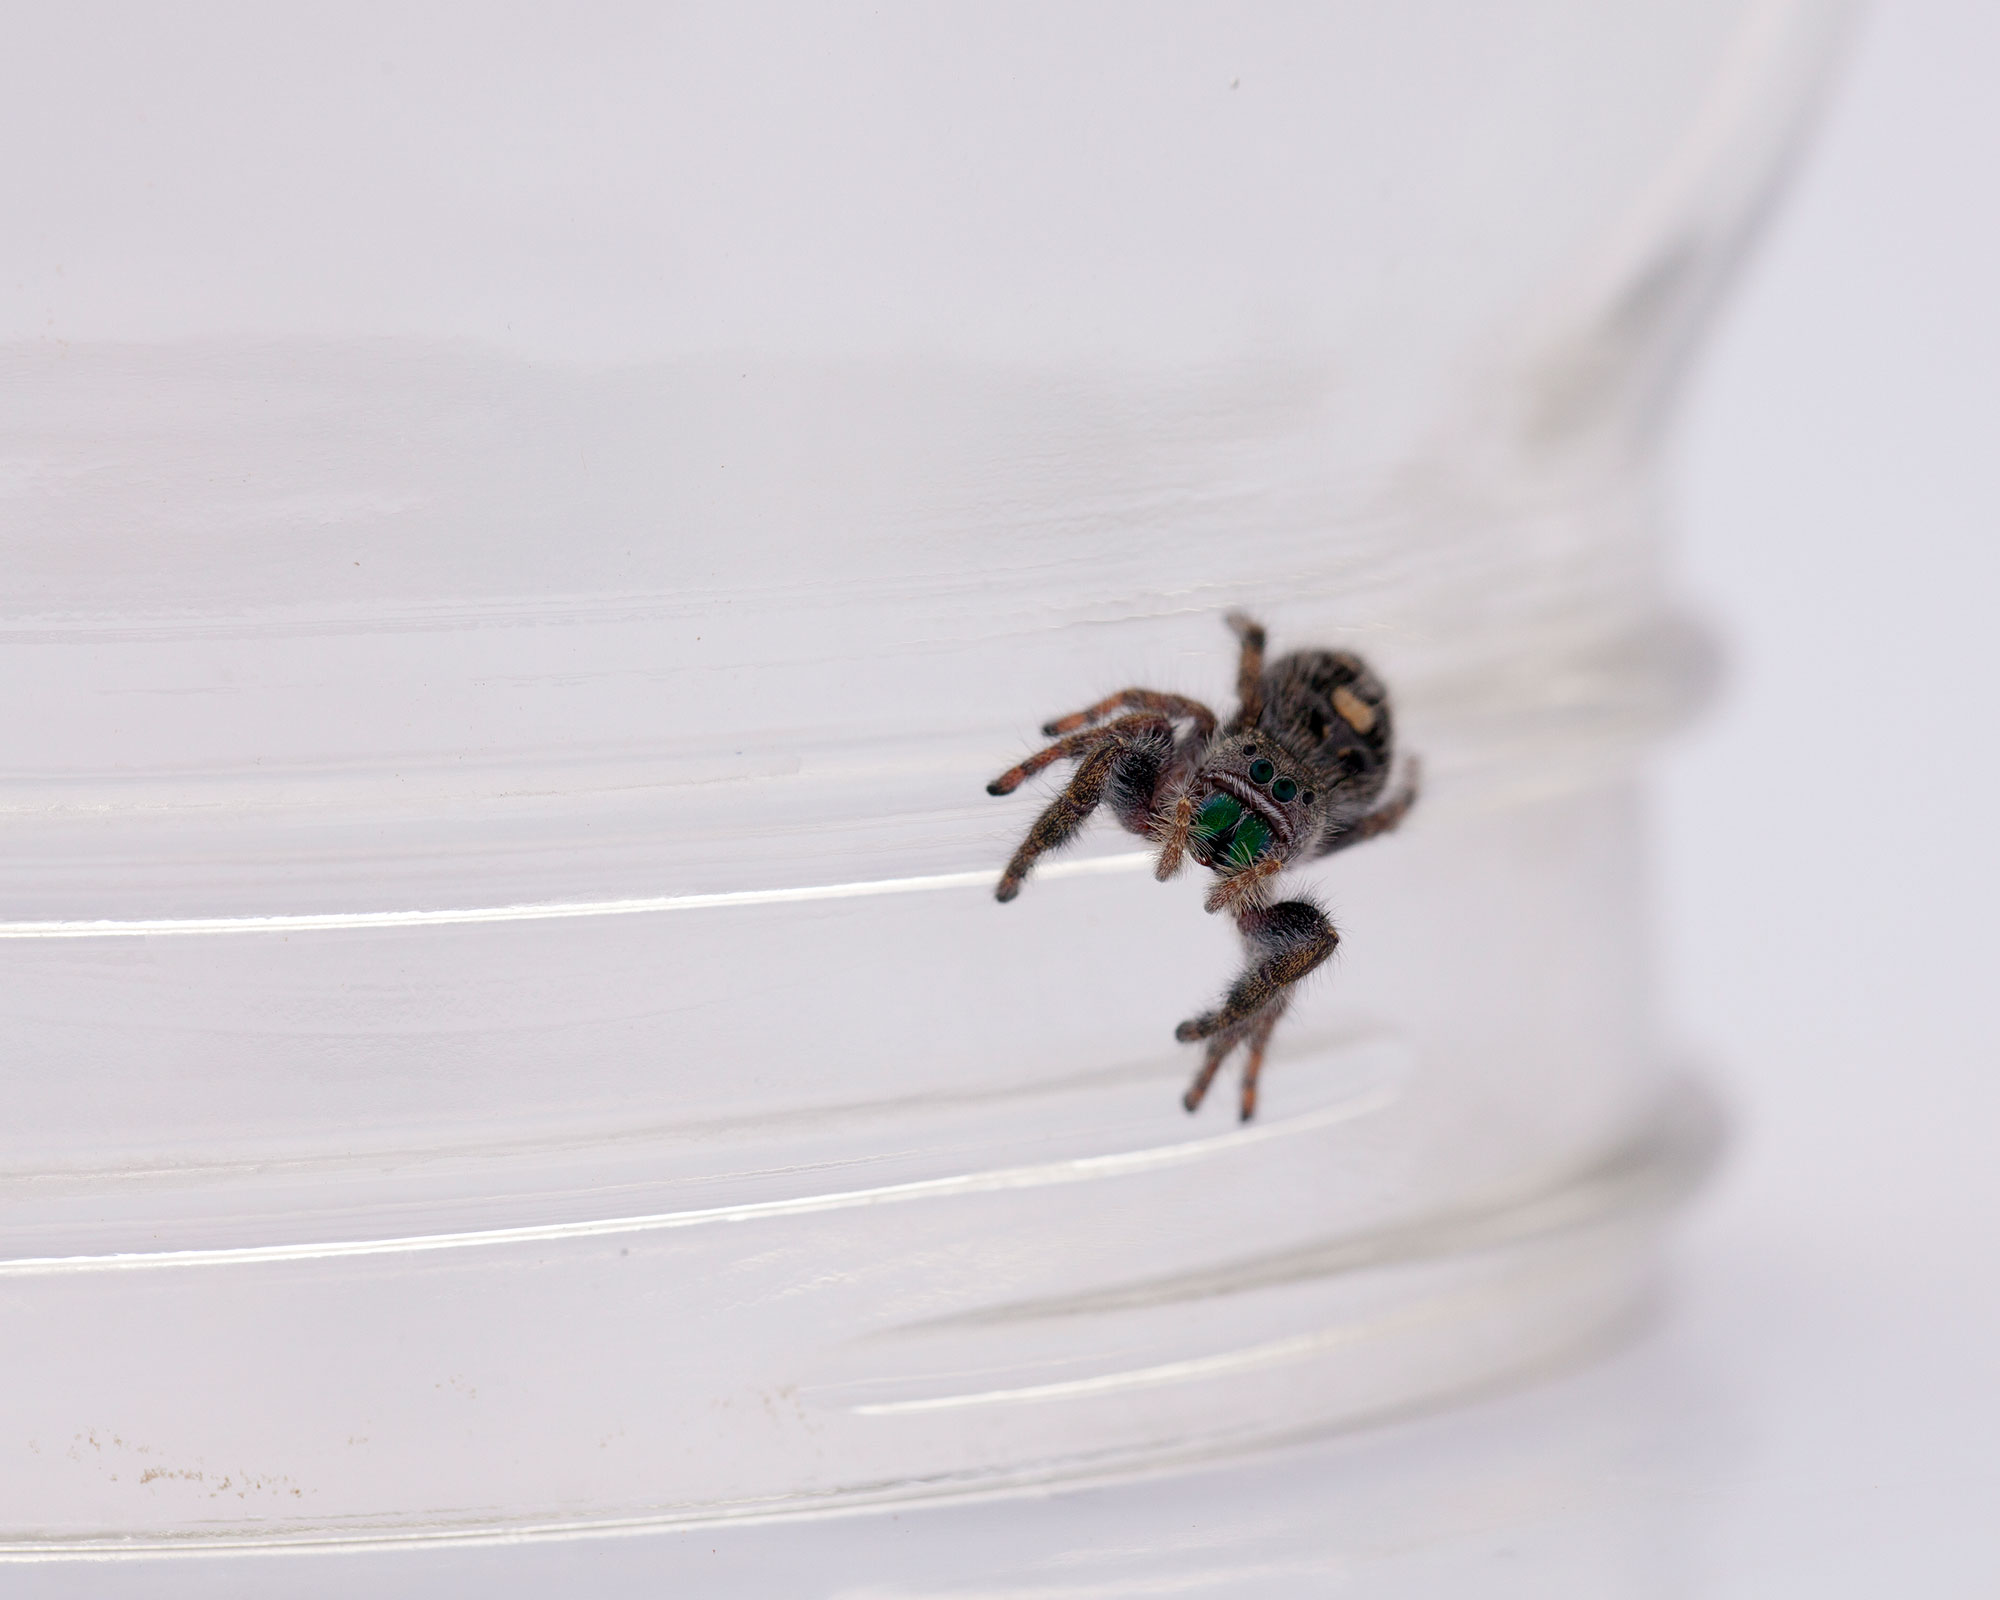 How to get rid of spiders - small spider on glass jar - Getty